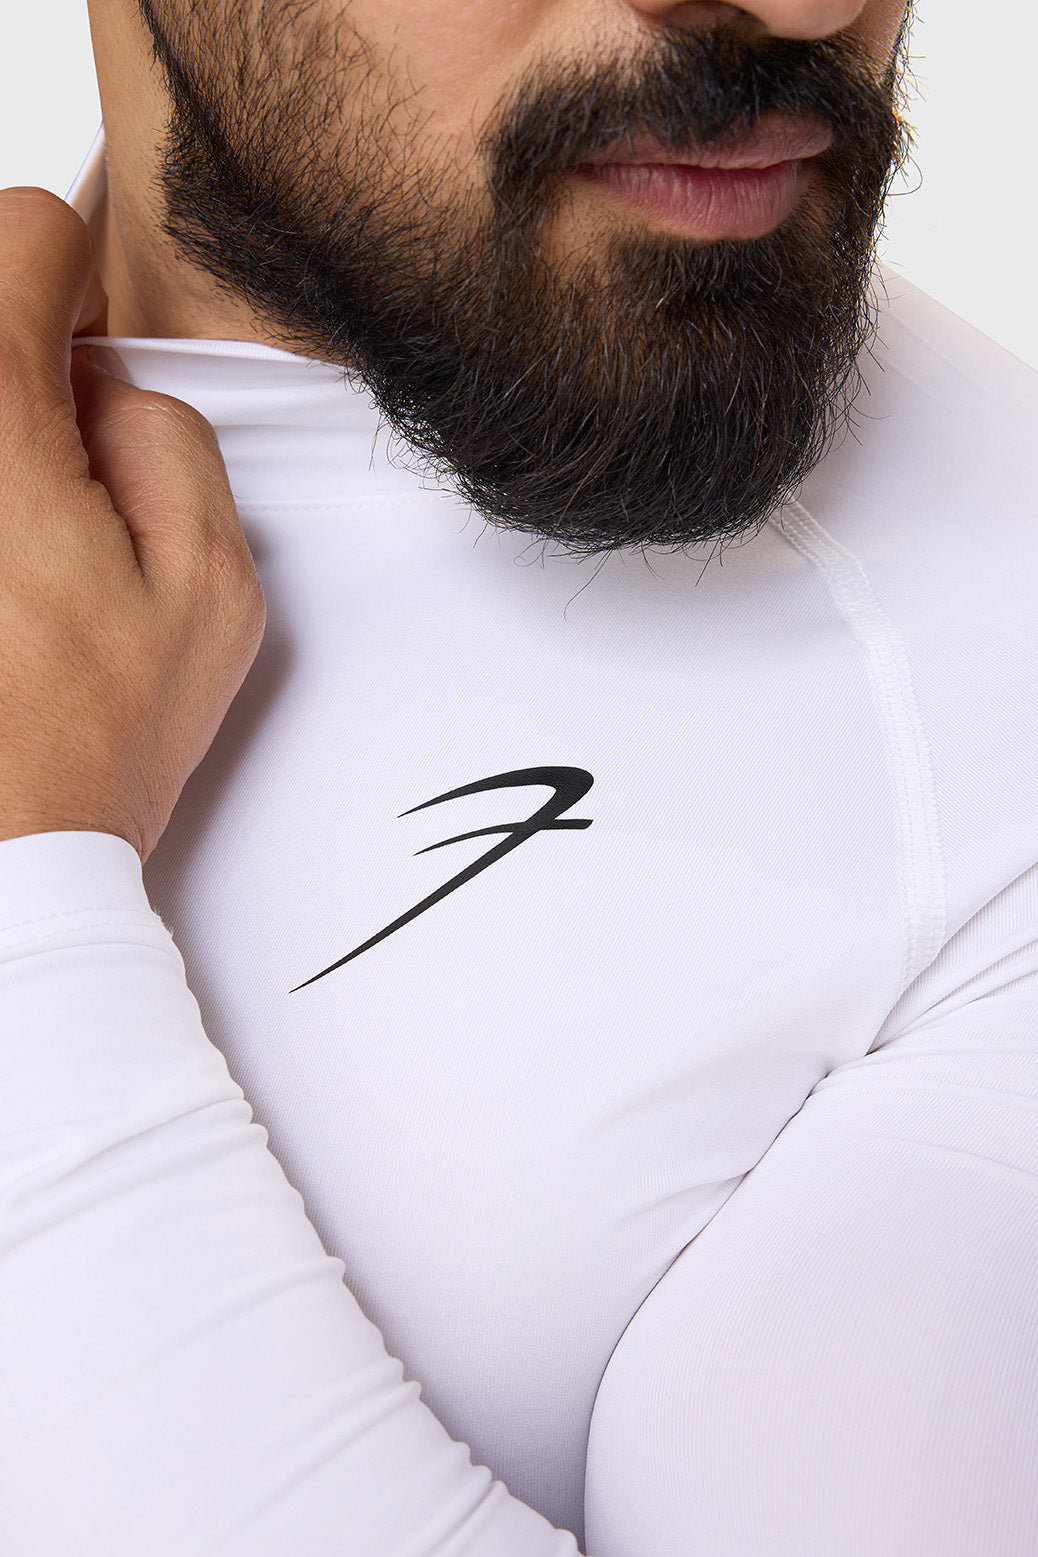 High Neck Compression Full Sleeves T-shirt White